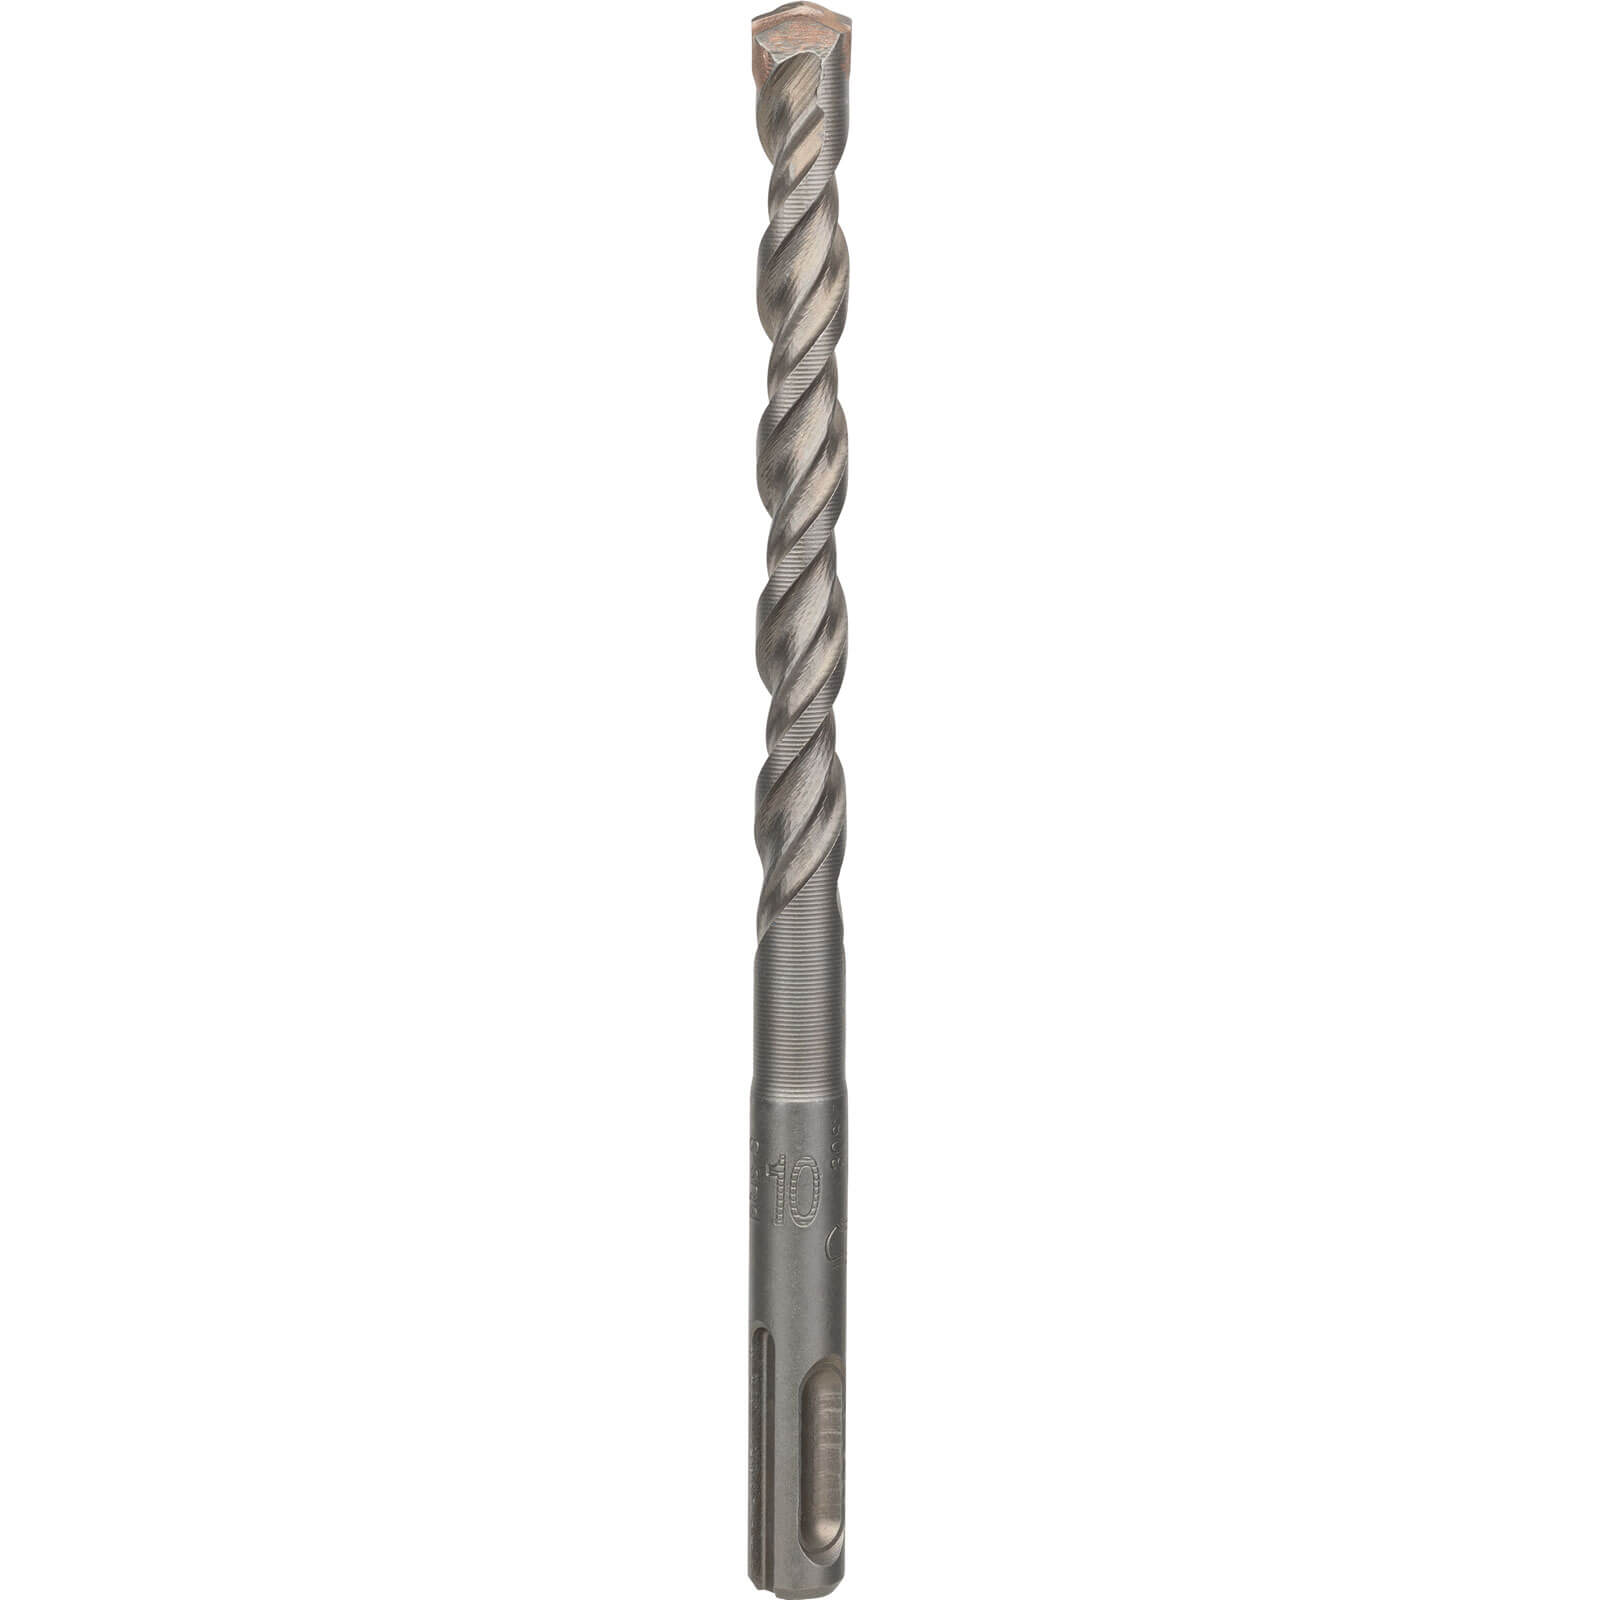 Image of Bosch Series 3 SDS Plus Masonry Drill Bit 10mm 160mm Pack of 1